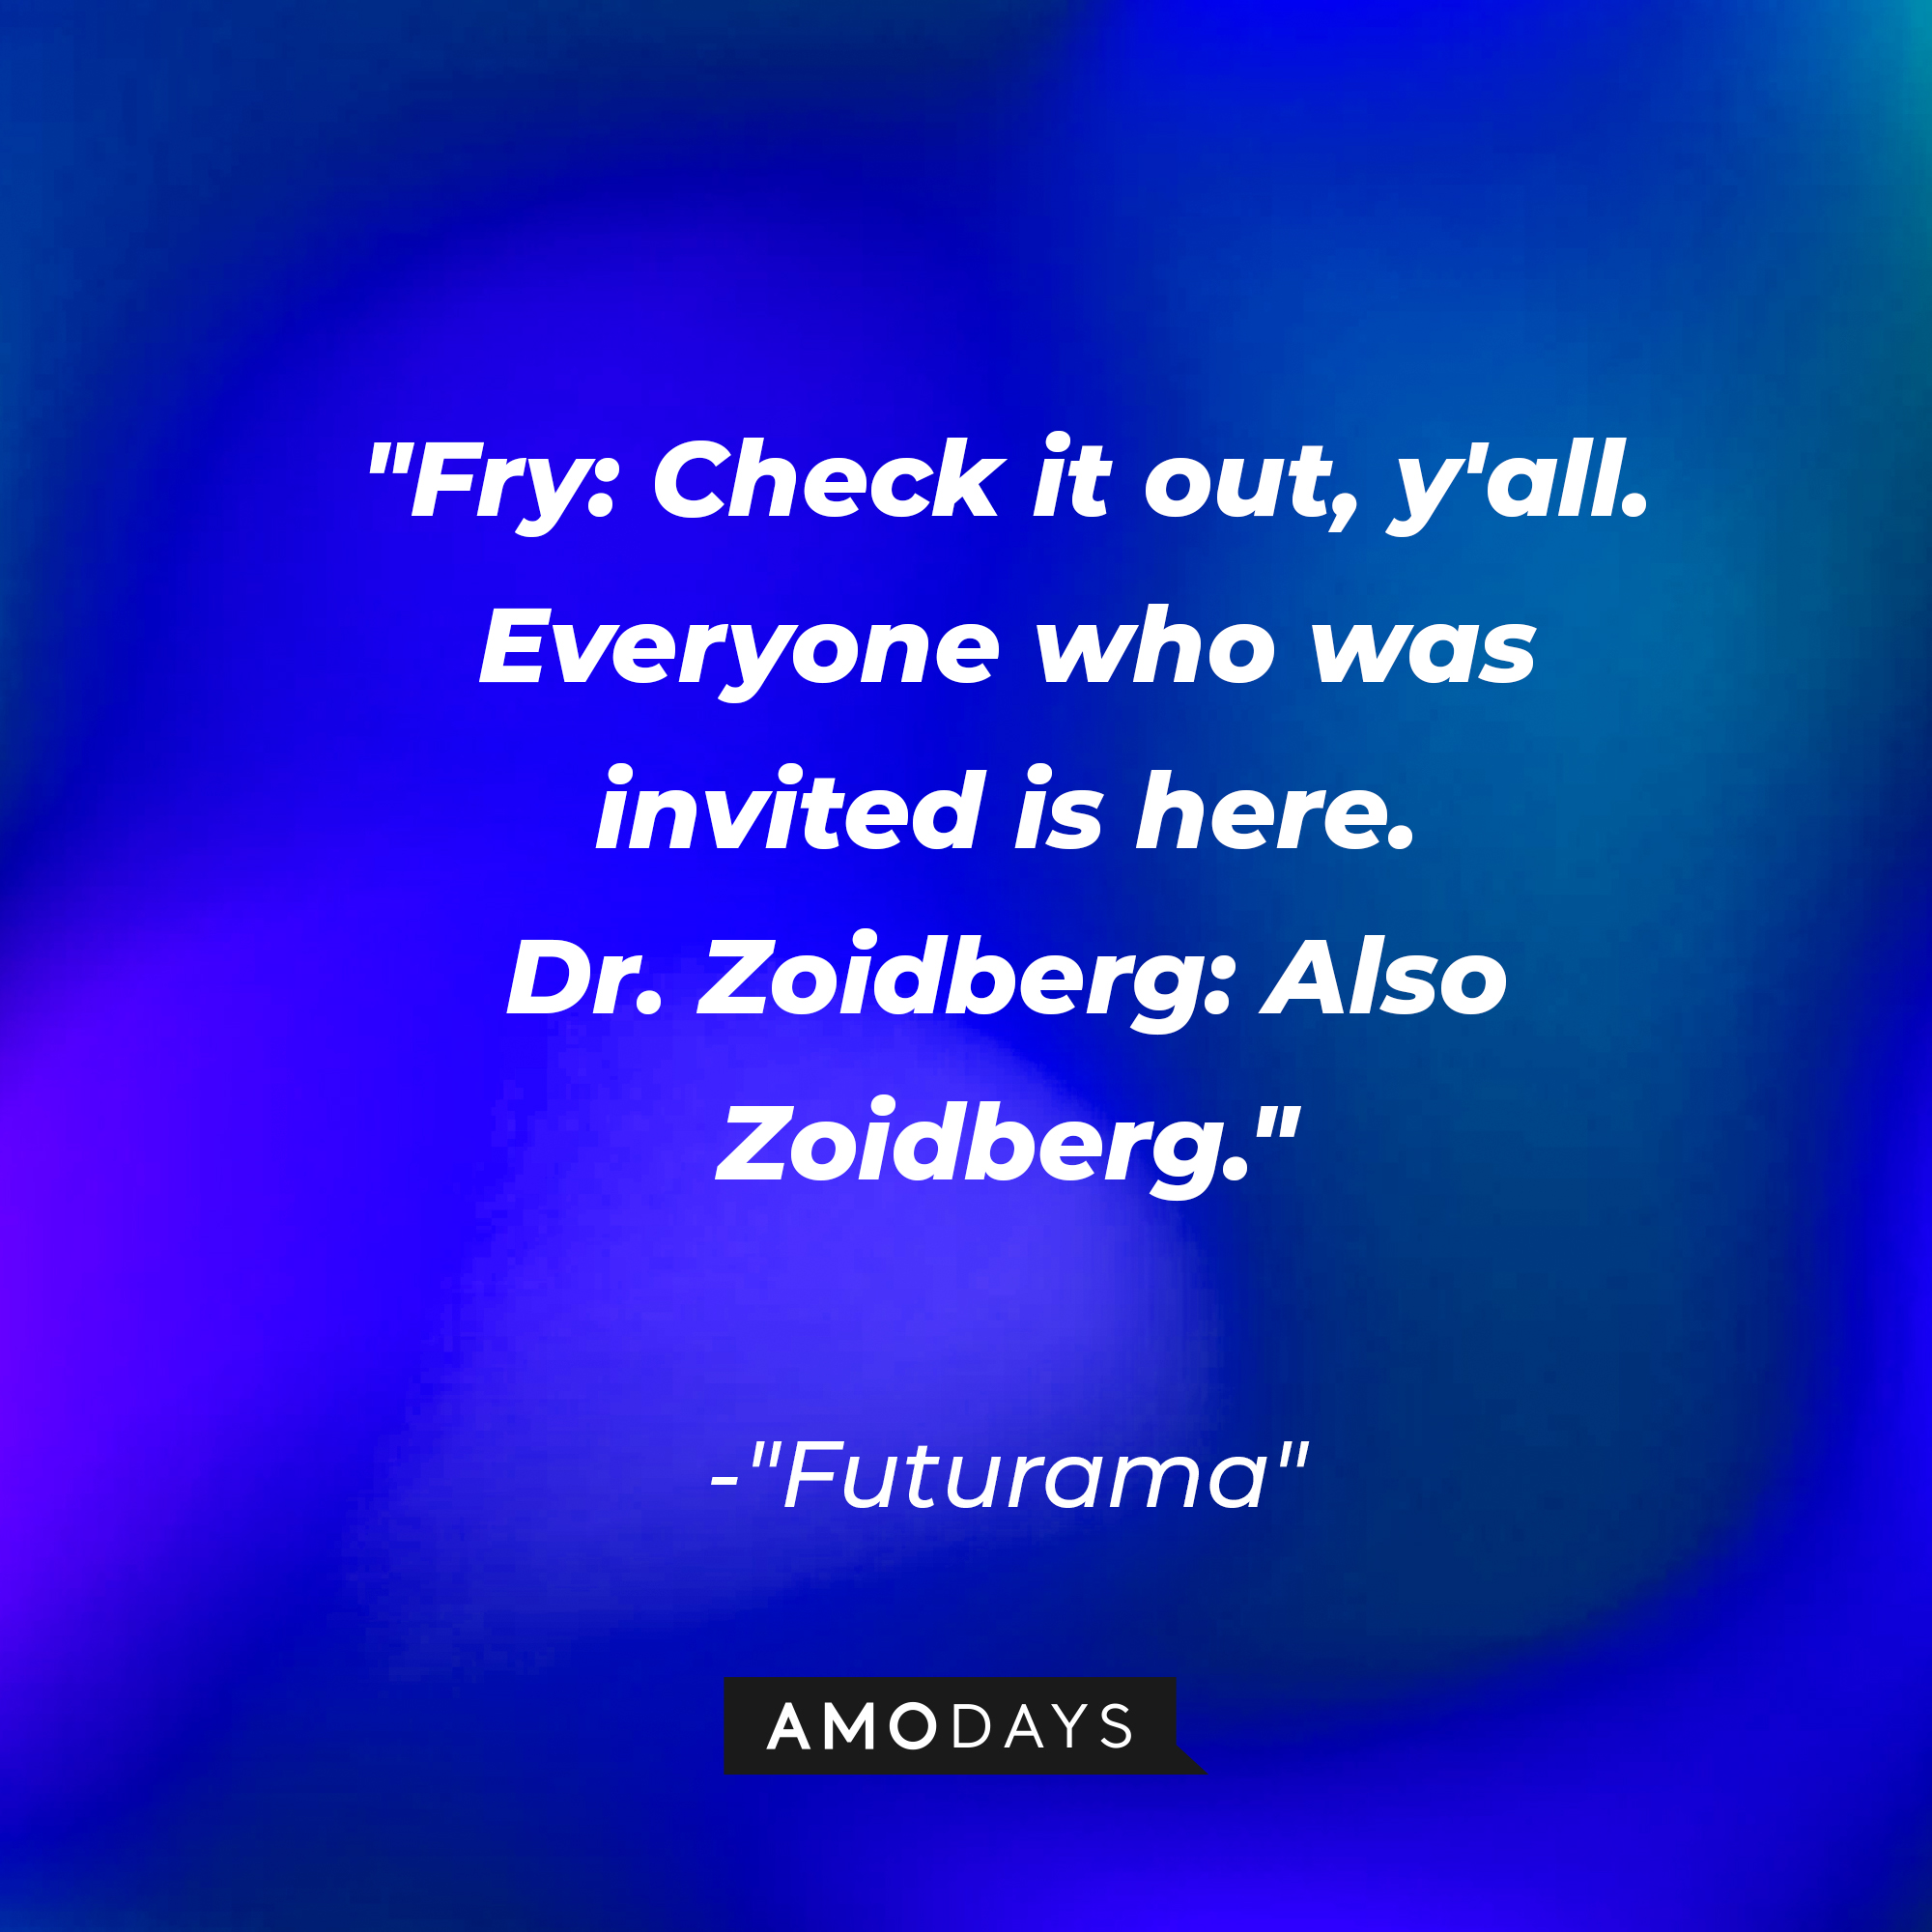 "Futurama" quote: "Fry: Check it out, y'all. Everyone who was invited is here. / Dr. Zoidberg: Also Zoidberg." | Source: AmoDays